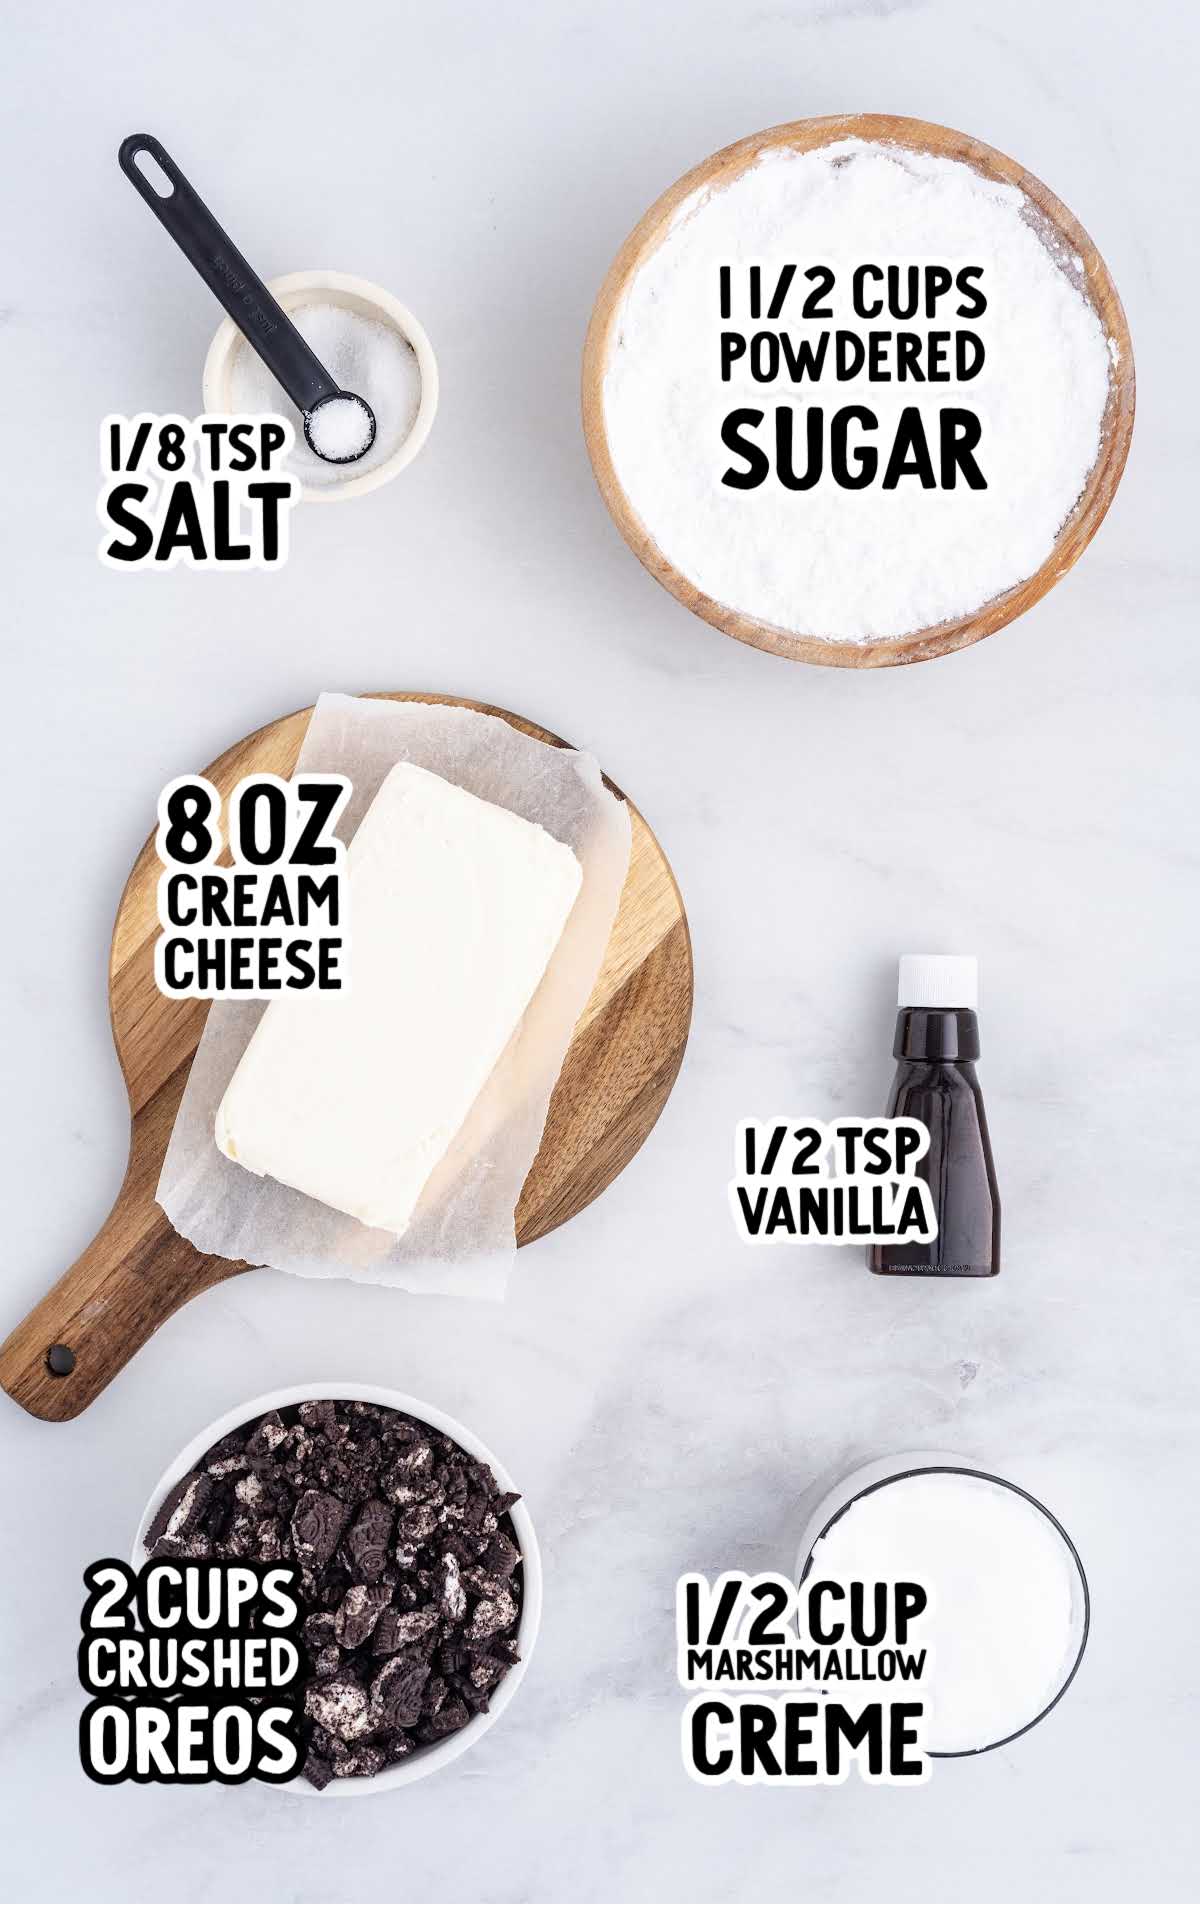 Oreo Dip raw ingredients that are labeled